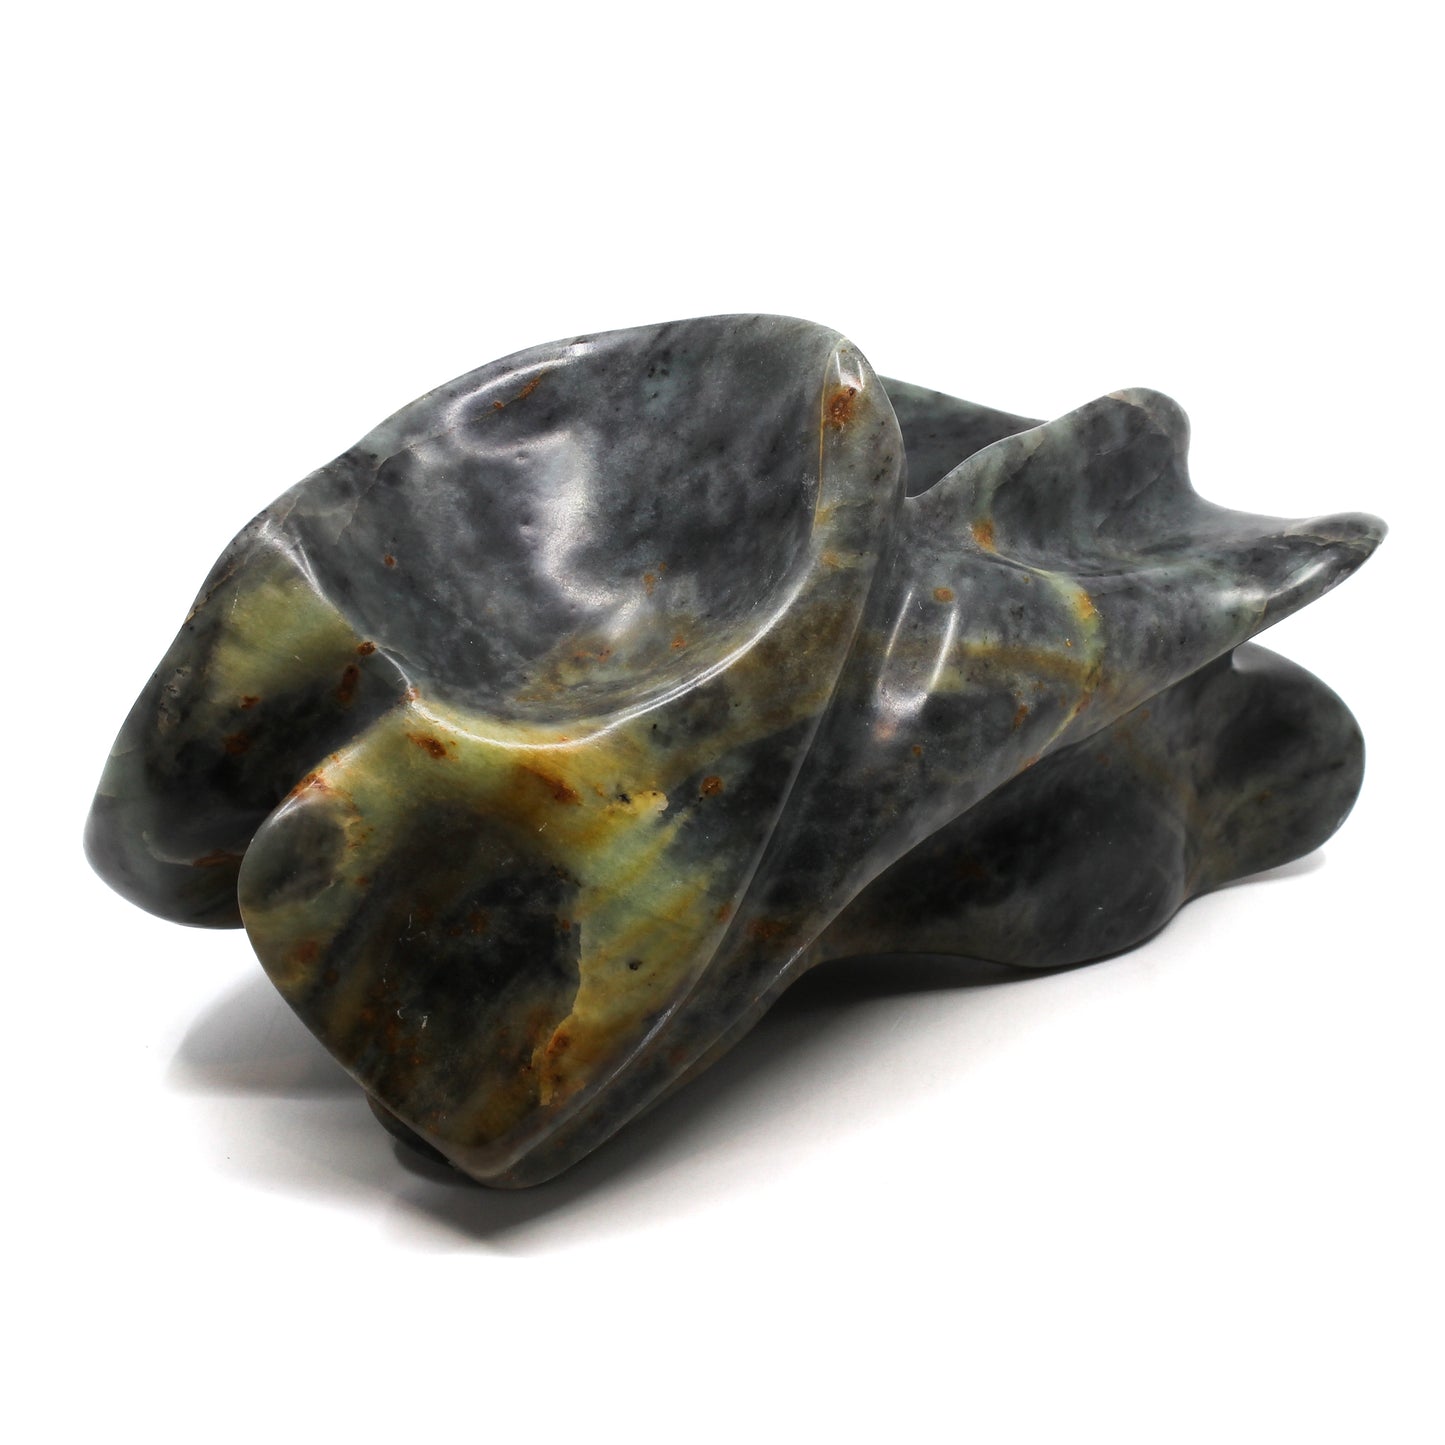 Abstract soapstone sculpture 